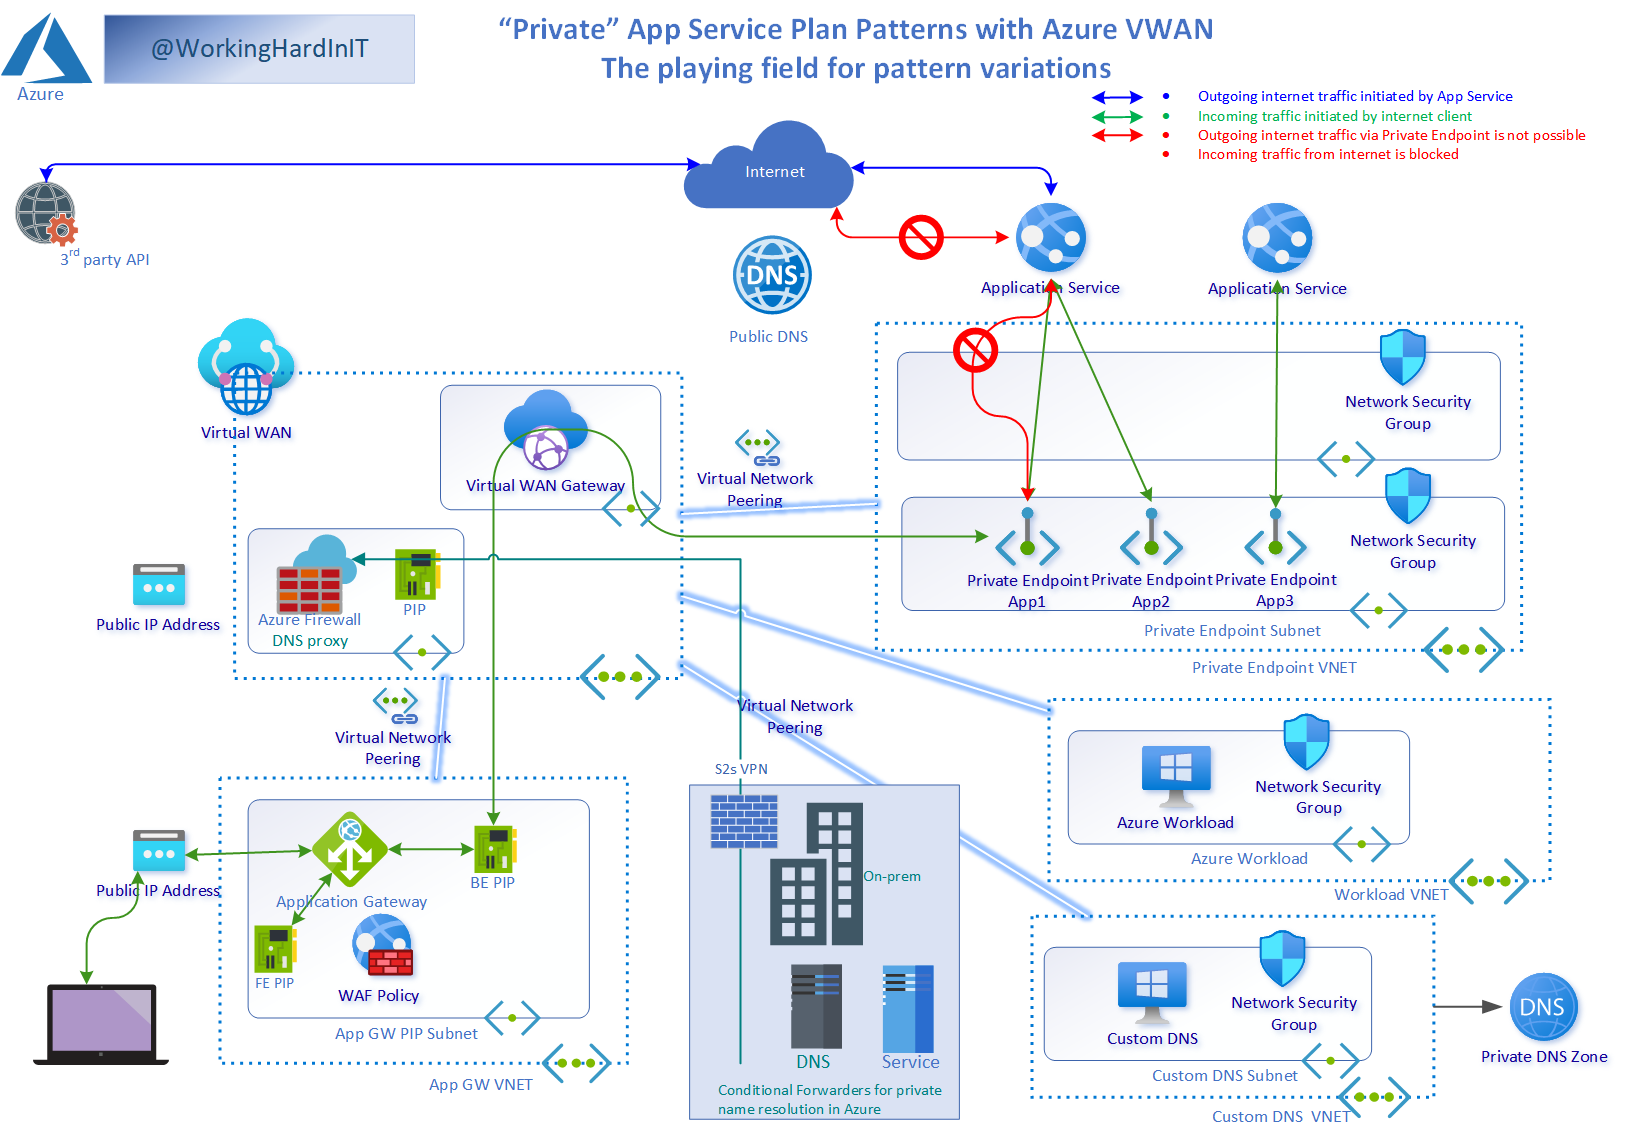 The Azure VWAN environment with Web App and App Gateway